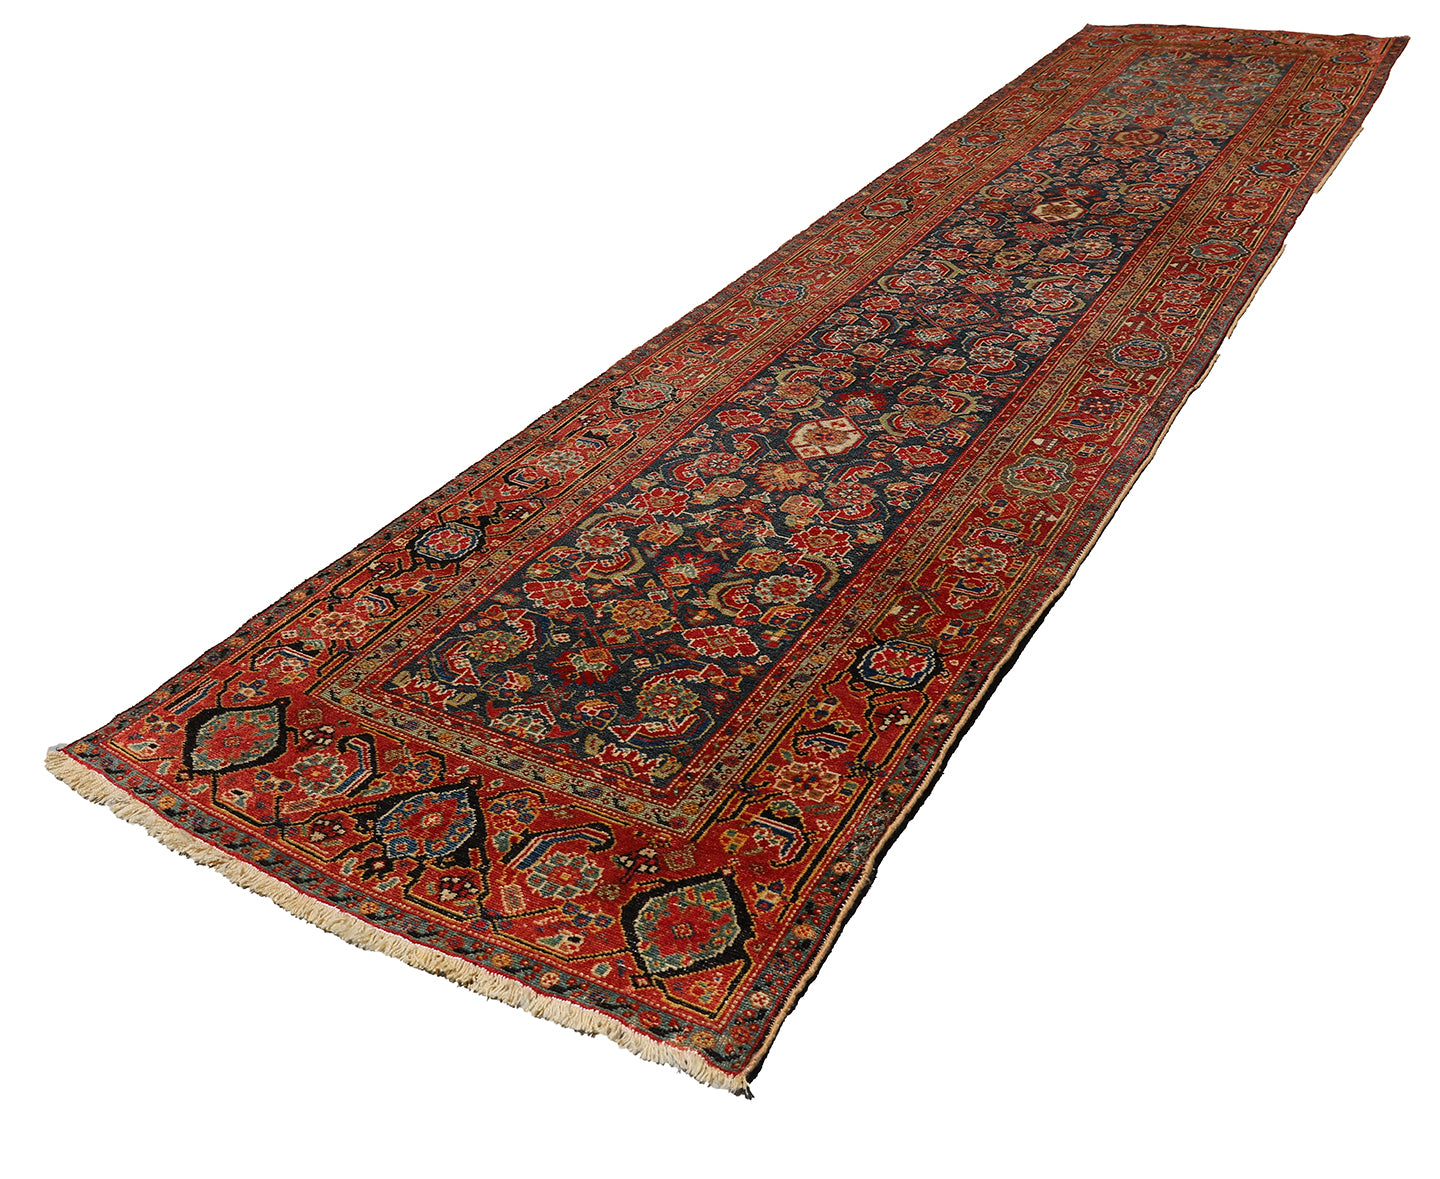 4'x15' Rare Teal Blue and Red Antique Persian Malayer Runner Rug